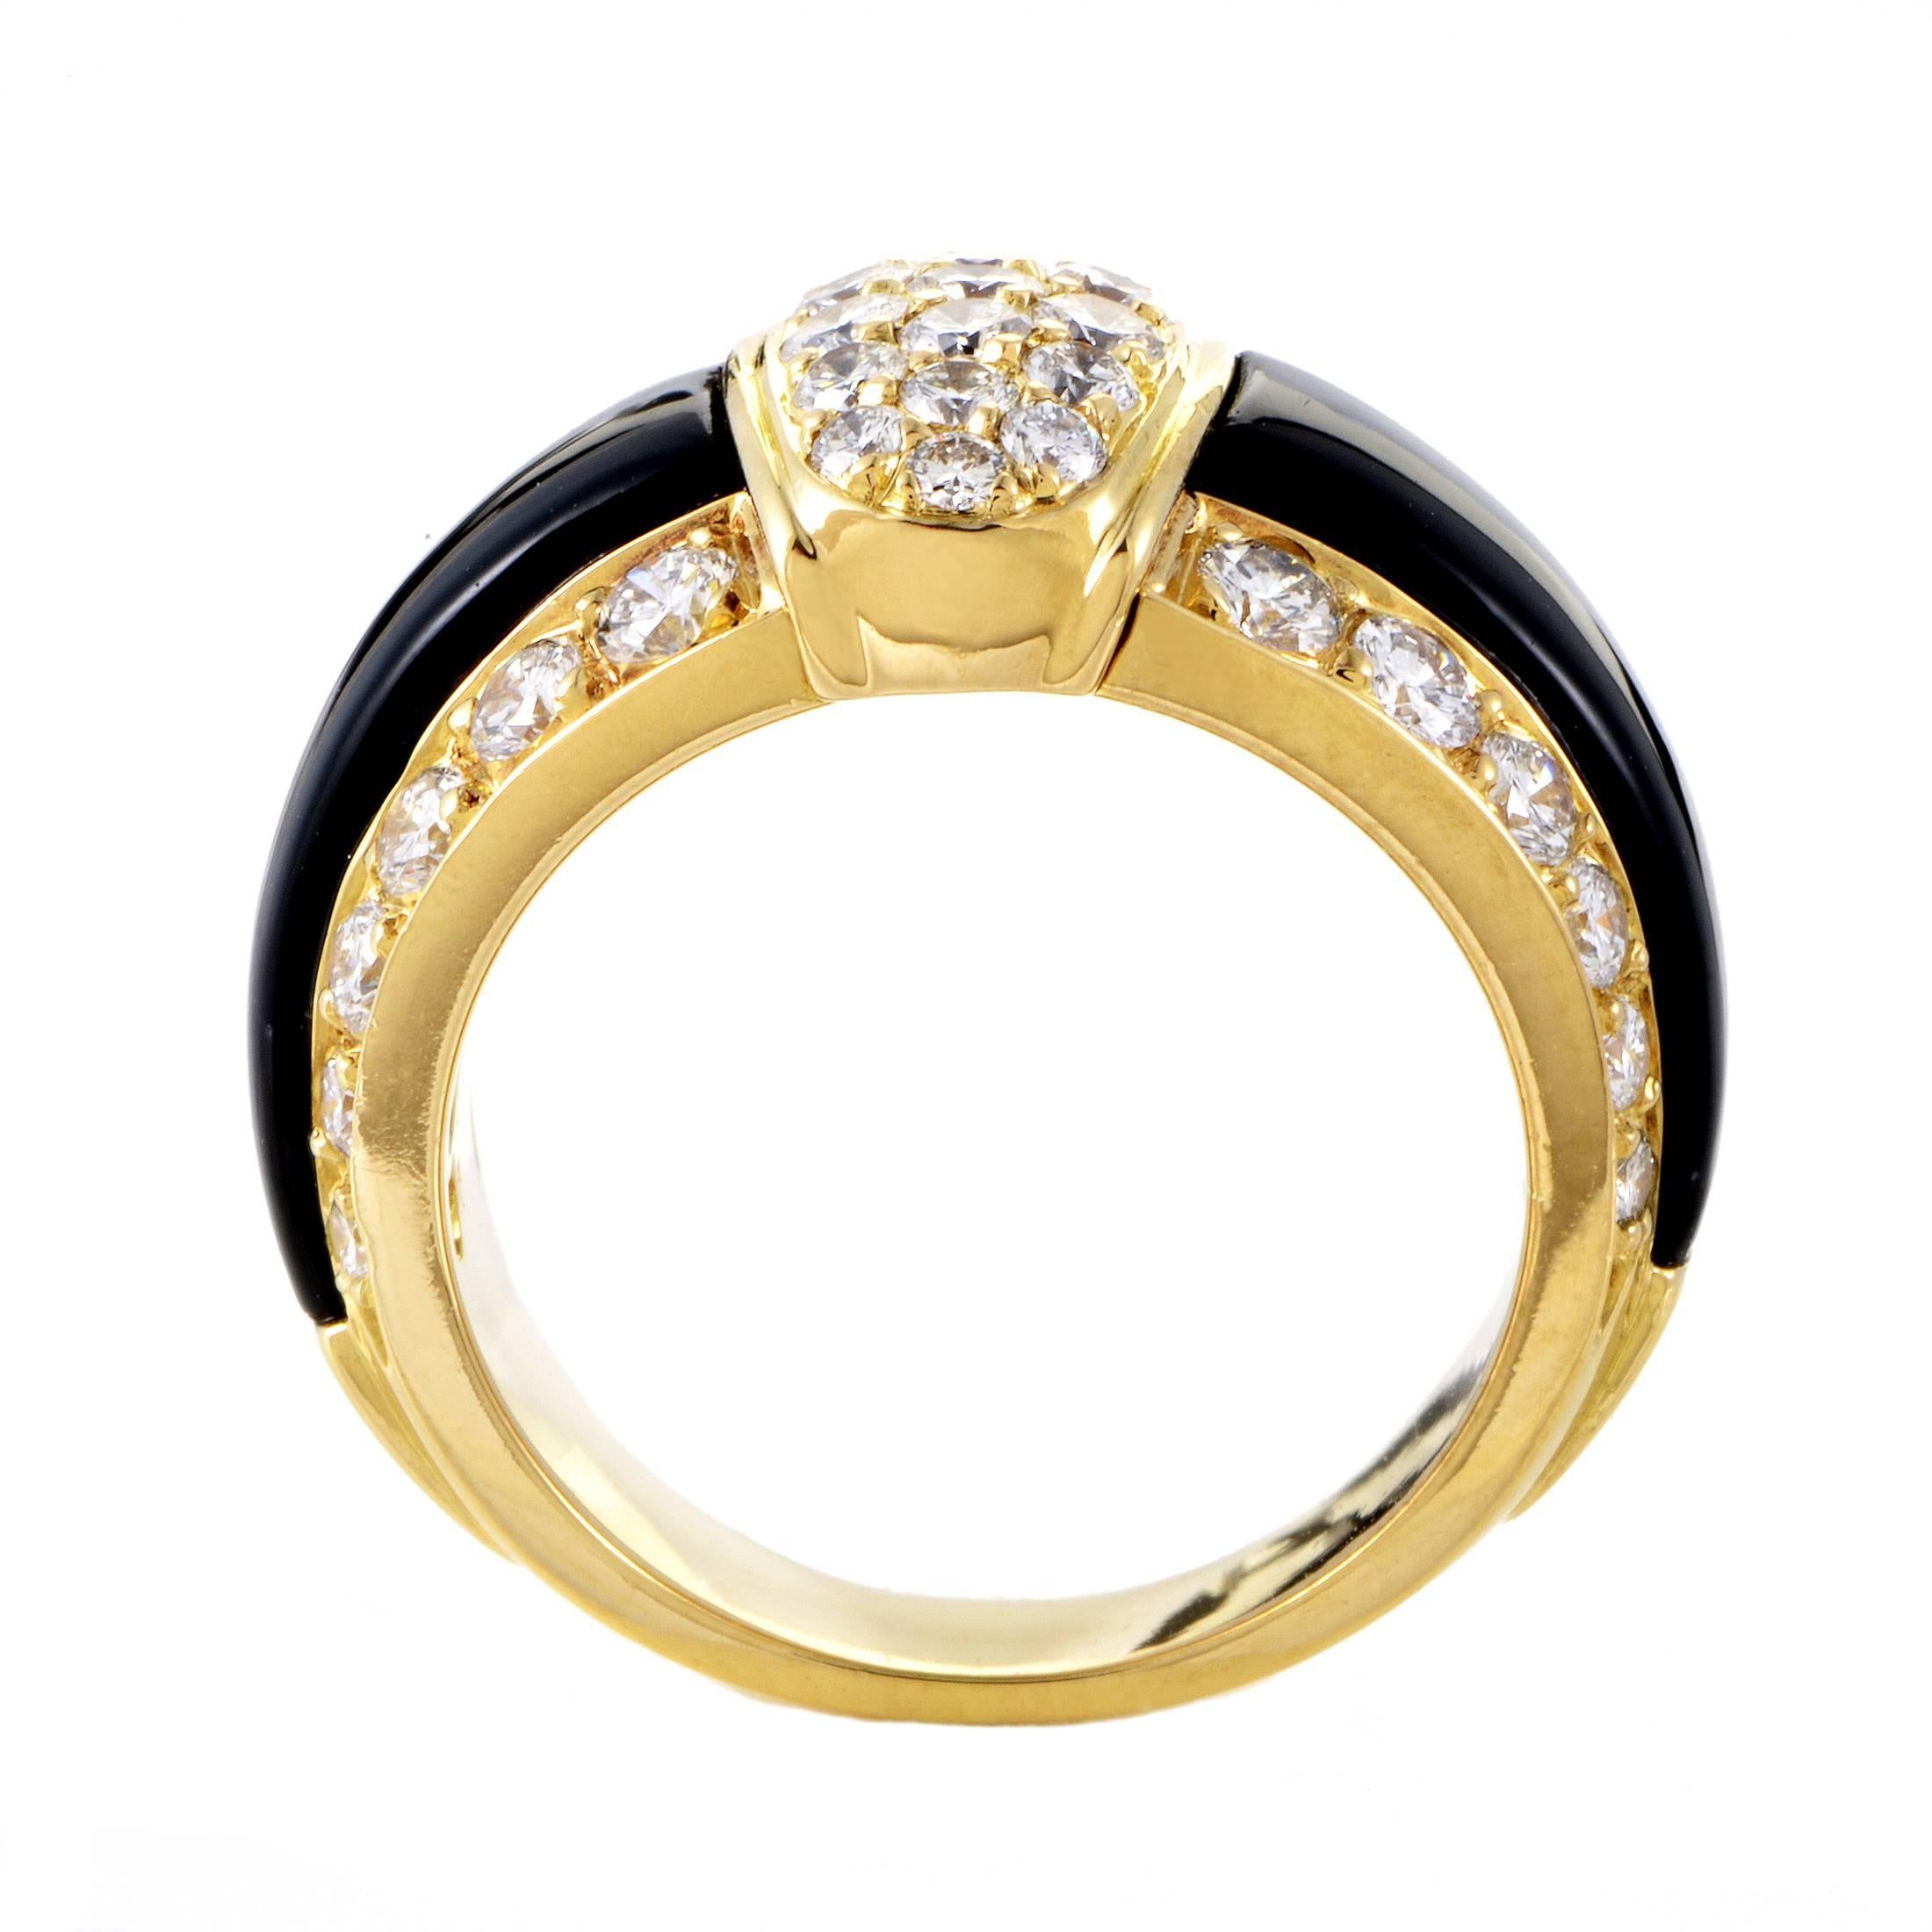 Allowing the resplendent diamonds weighing in total 1.28 carats to exude their prestigious brilliance in all its glorious beauty, the captivating onyx stones are a perfect addition to this majestic 18K yellow gold ring from Van Cleef & Arpels.
Ring